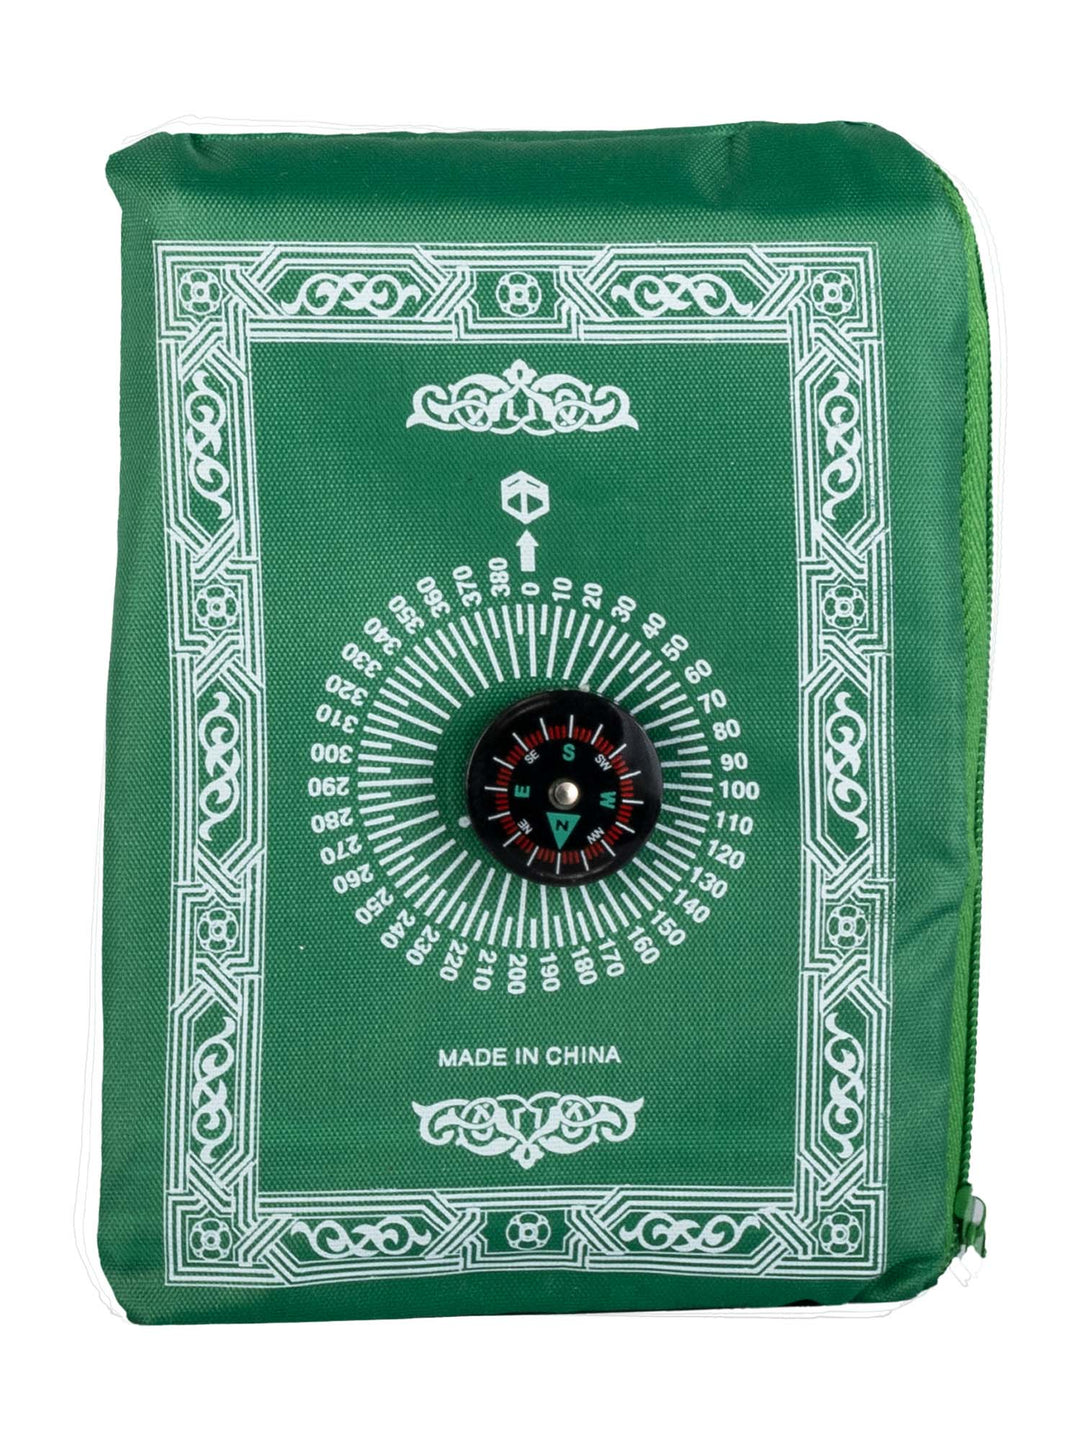 Travel Prayer Mat -  With Built In Compass and Pouch